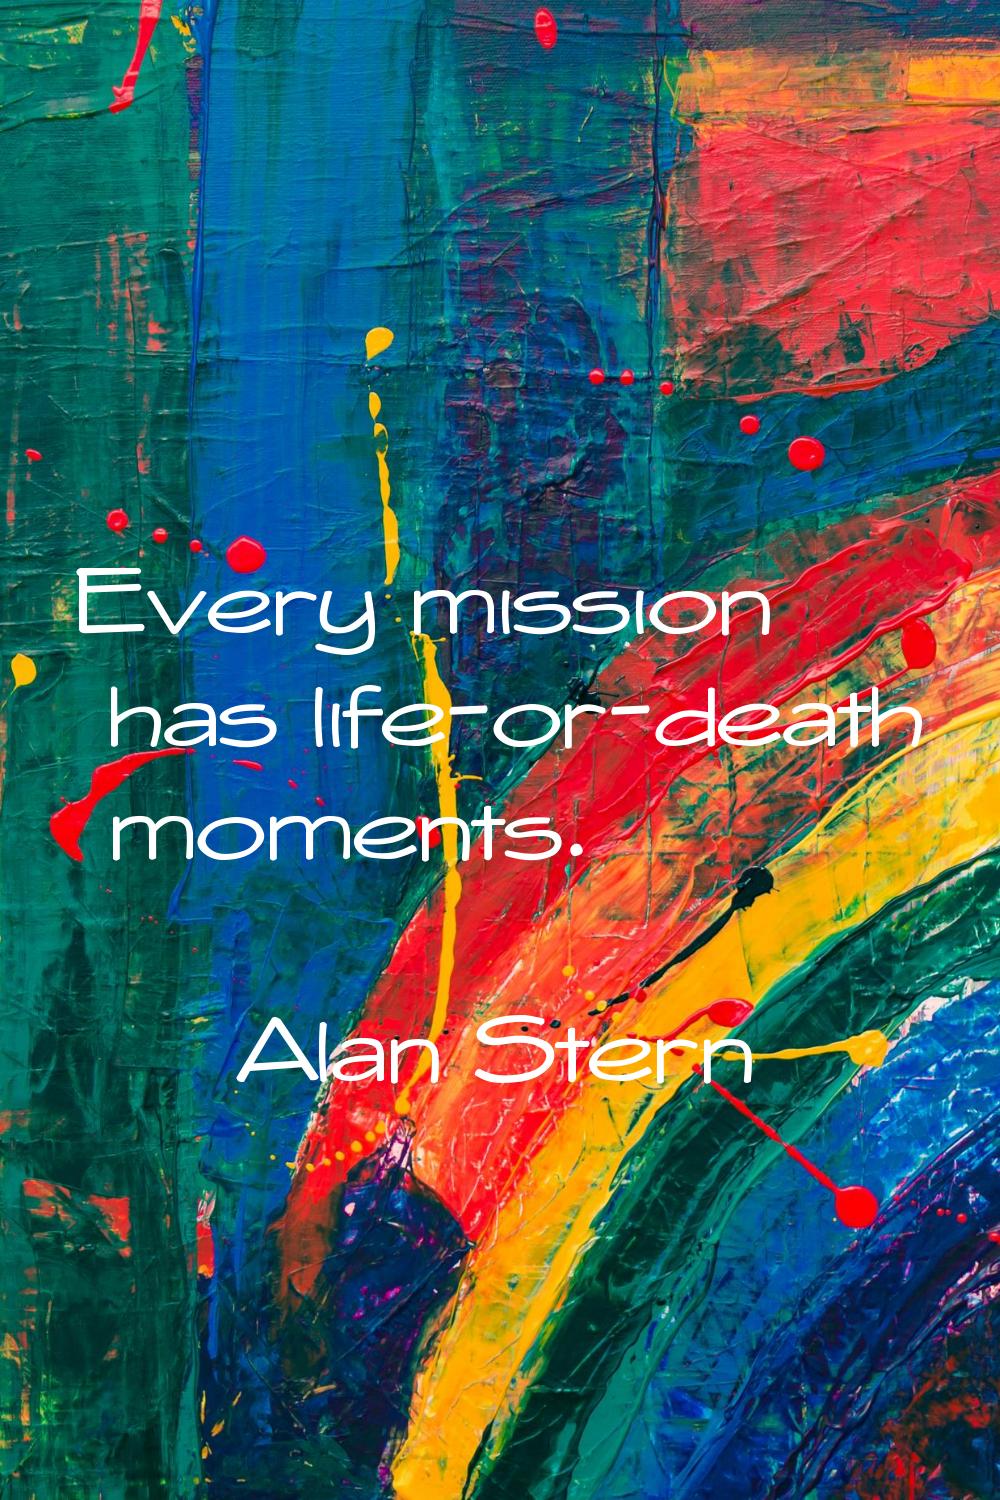 Every mission has life-or-death moments.